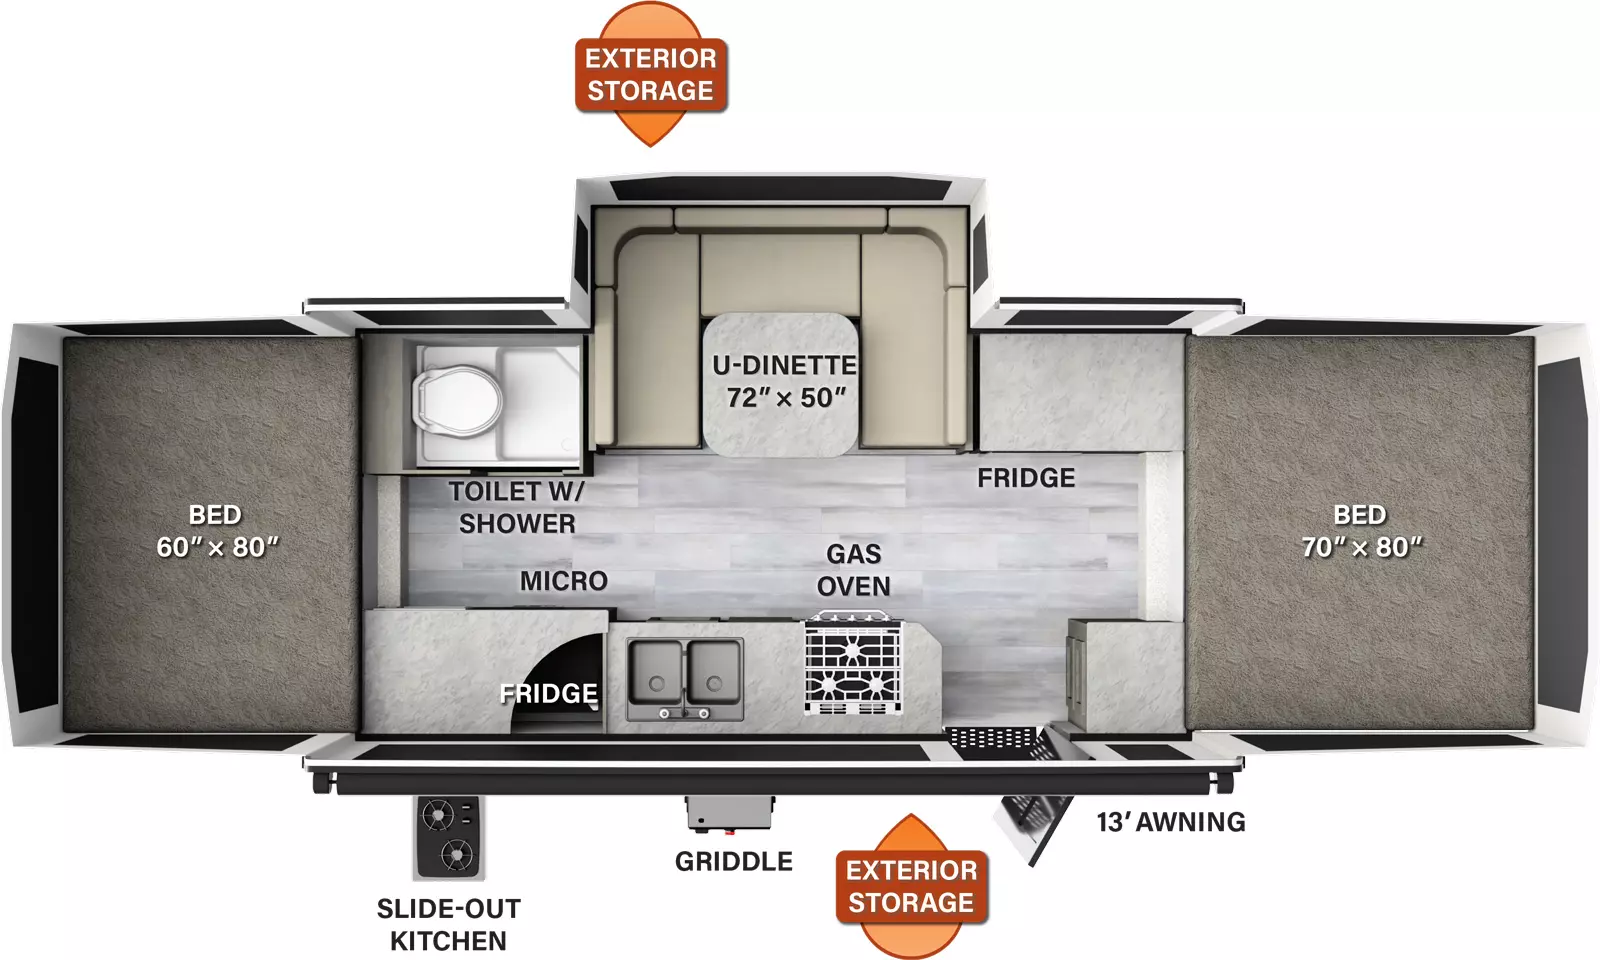 The HW27KS has one slide out on the off-door side and one entry door. Exterior features include a 13 foot awning, griddle, slideout kitchen with refrigerator and exterior storage on both sides. Interior layout from front to back: front tent bed; off-door side cabinet with refrigerator, u-dinette slideout, and toilet w/shower; door side cabinet, entry, gas oven, sink, and cabinet with microwave; tent bed in the rear. 